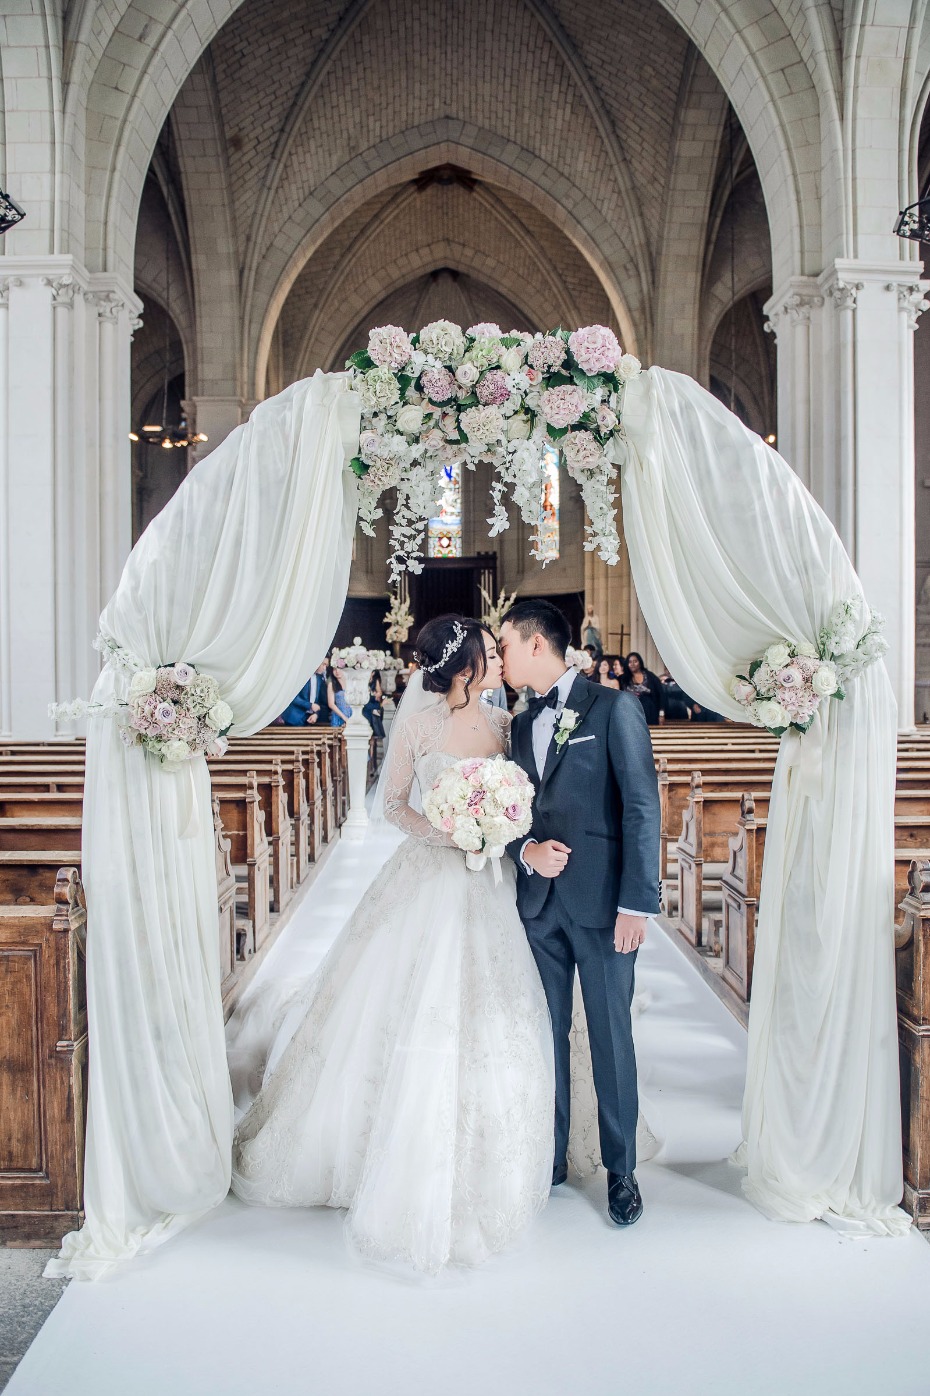 romantic wedding arch for your classic cathedral wedding ceremony